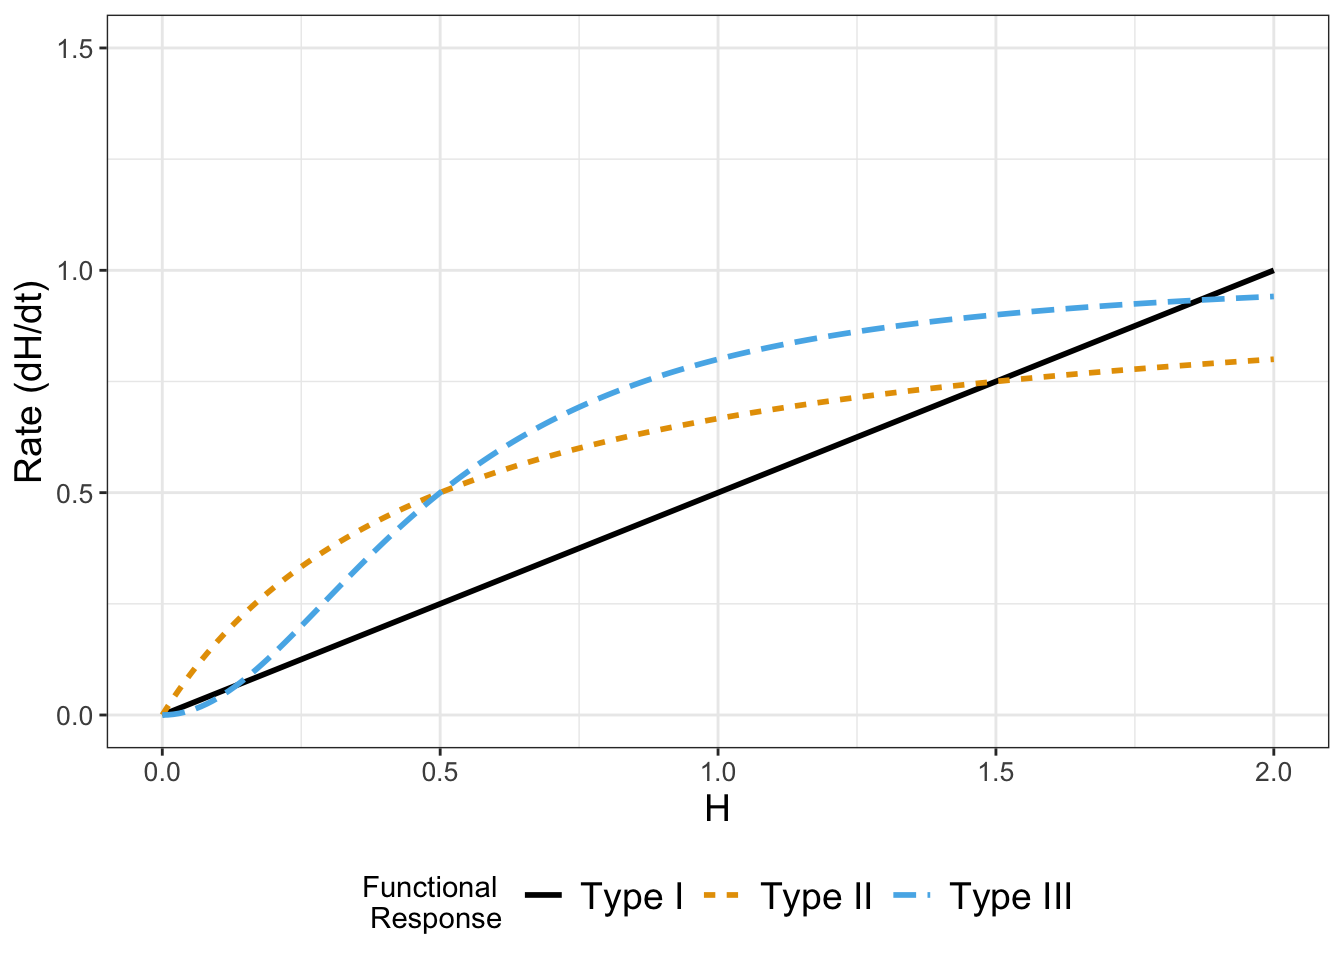 Comparison between examples of Type I - Type III functional responses. For a Type I functional response the rate grows proportional to population size *H*, whereas for Types II and III the rate reaches a saturating value.